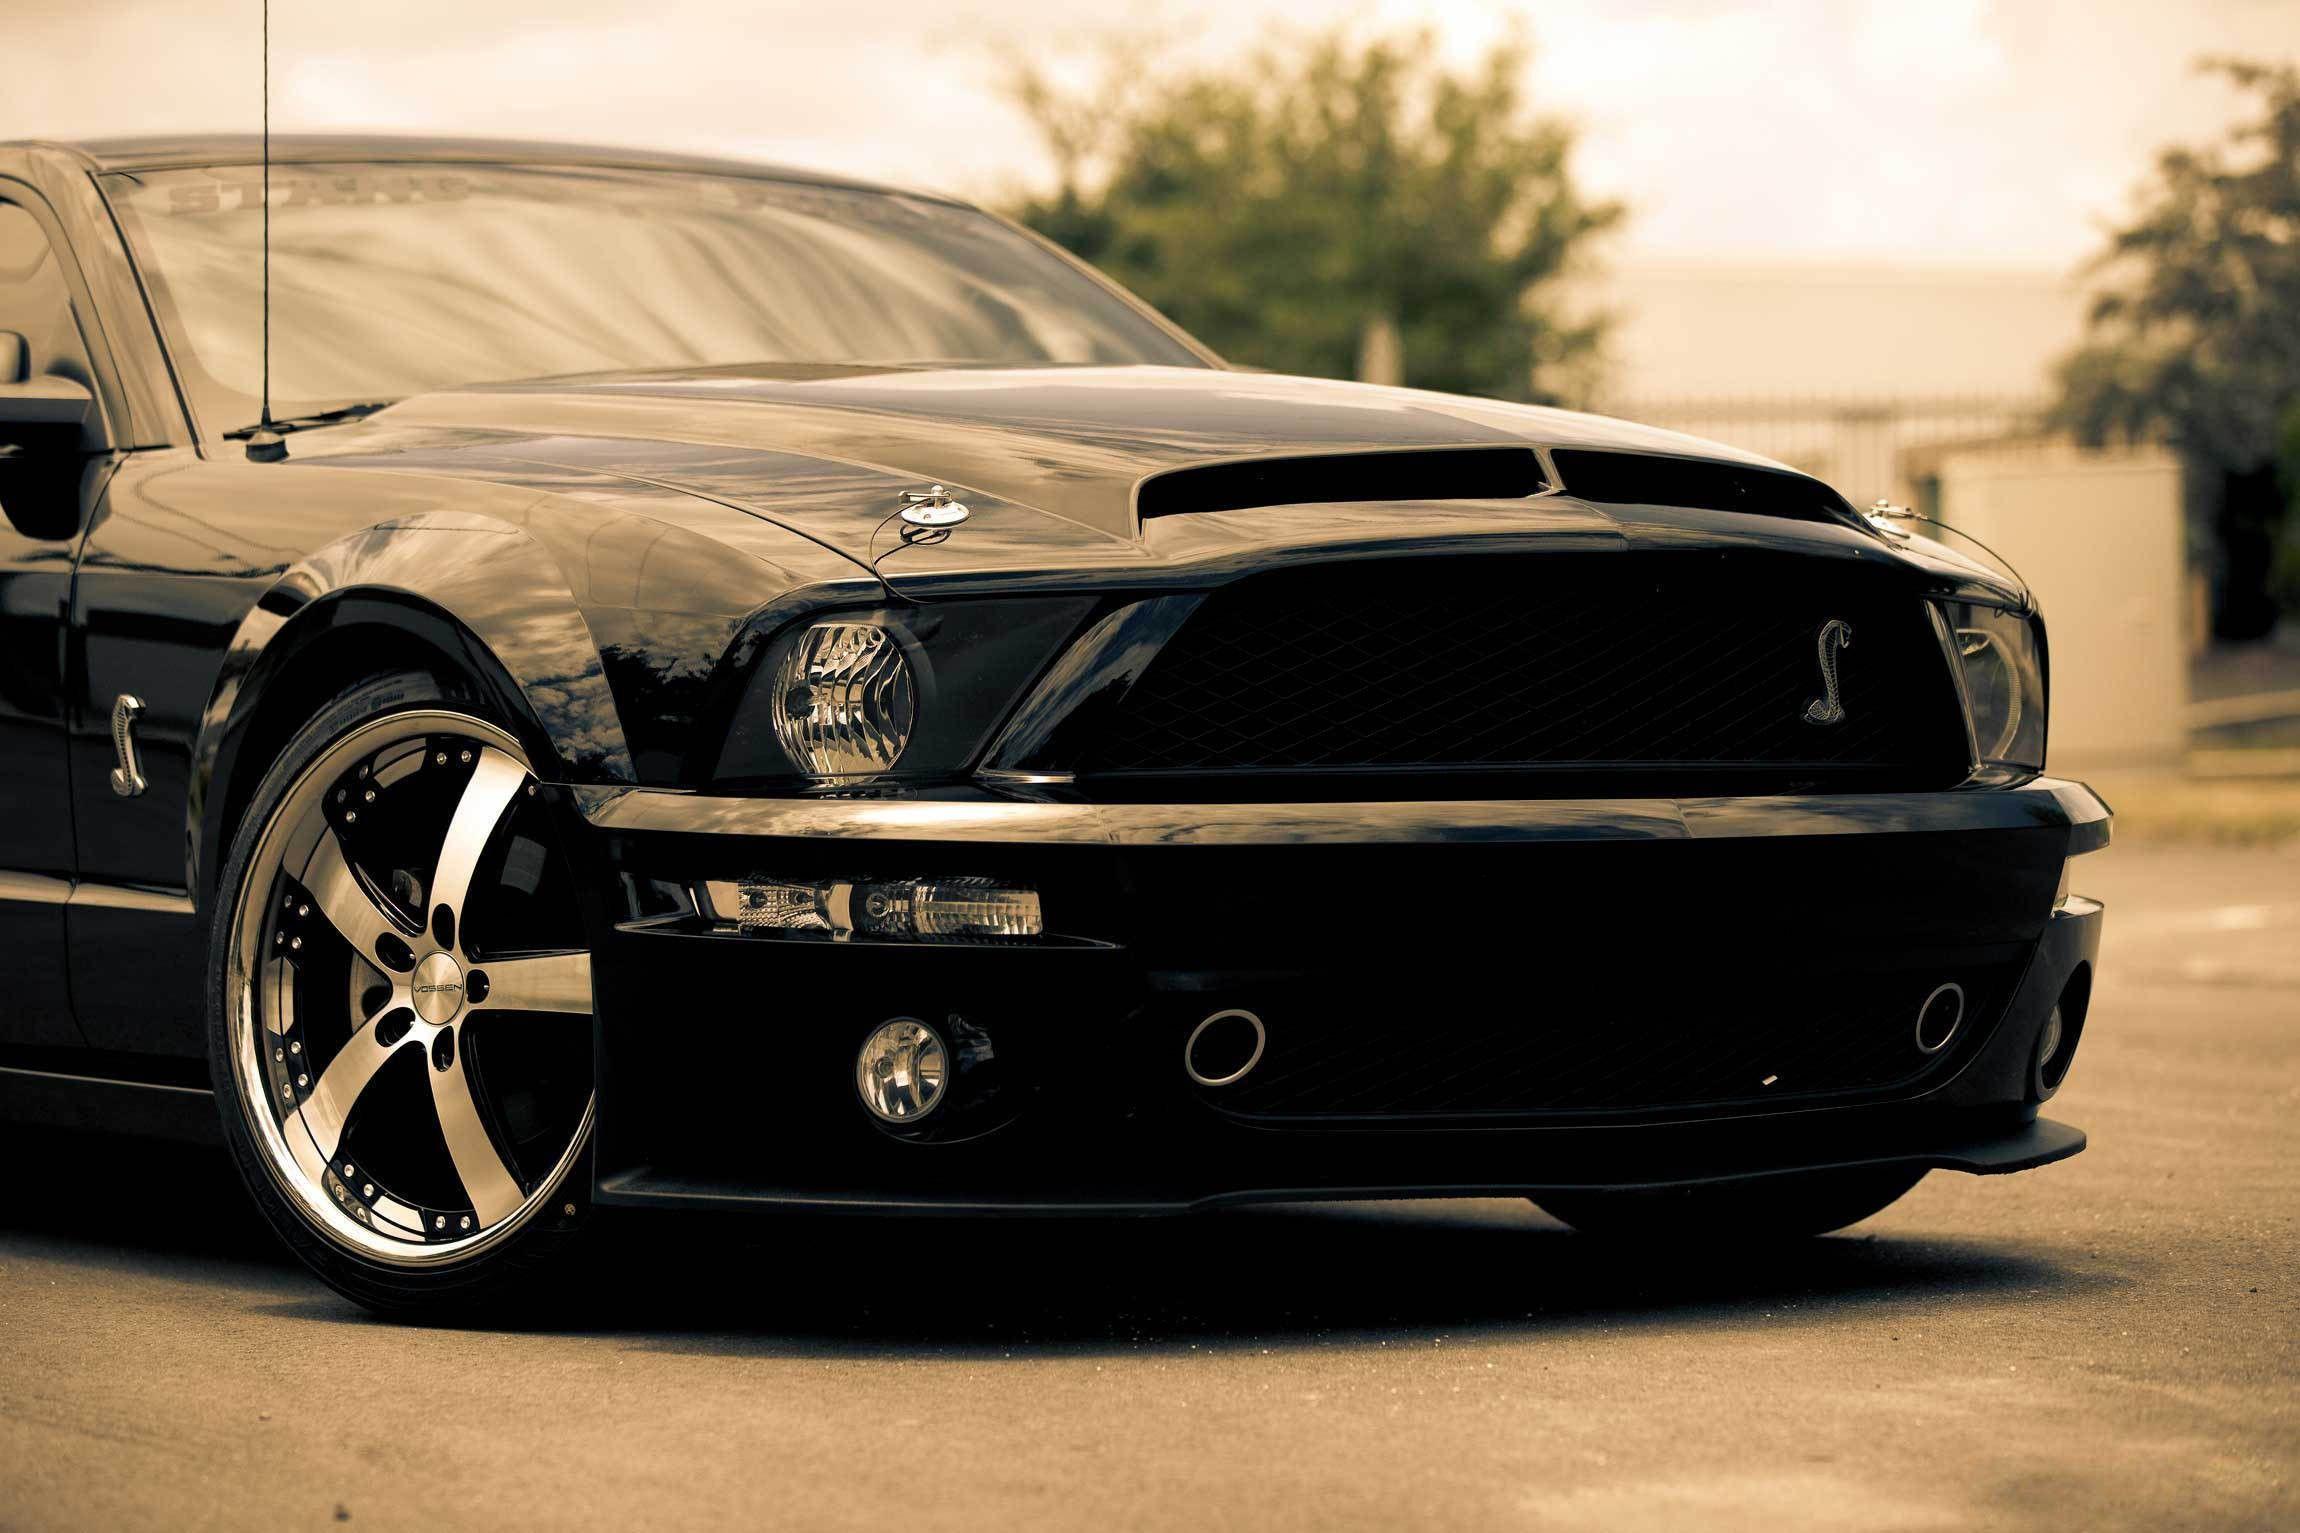 Ford Cars Wallpapers Wallpaper Cave